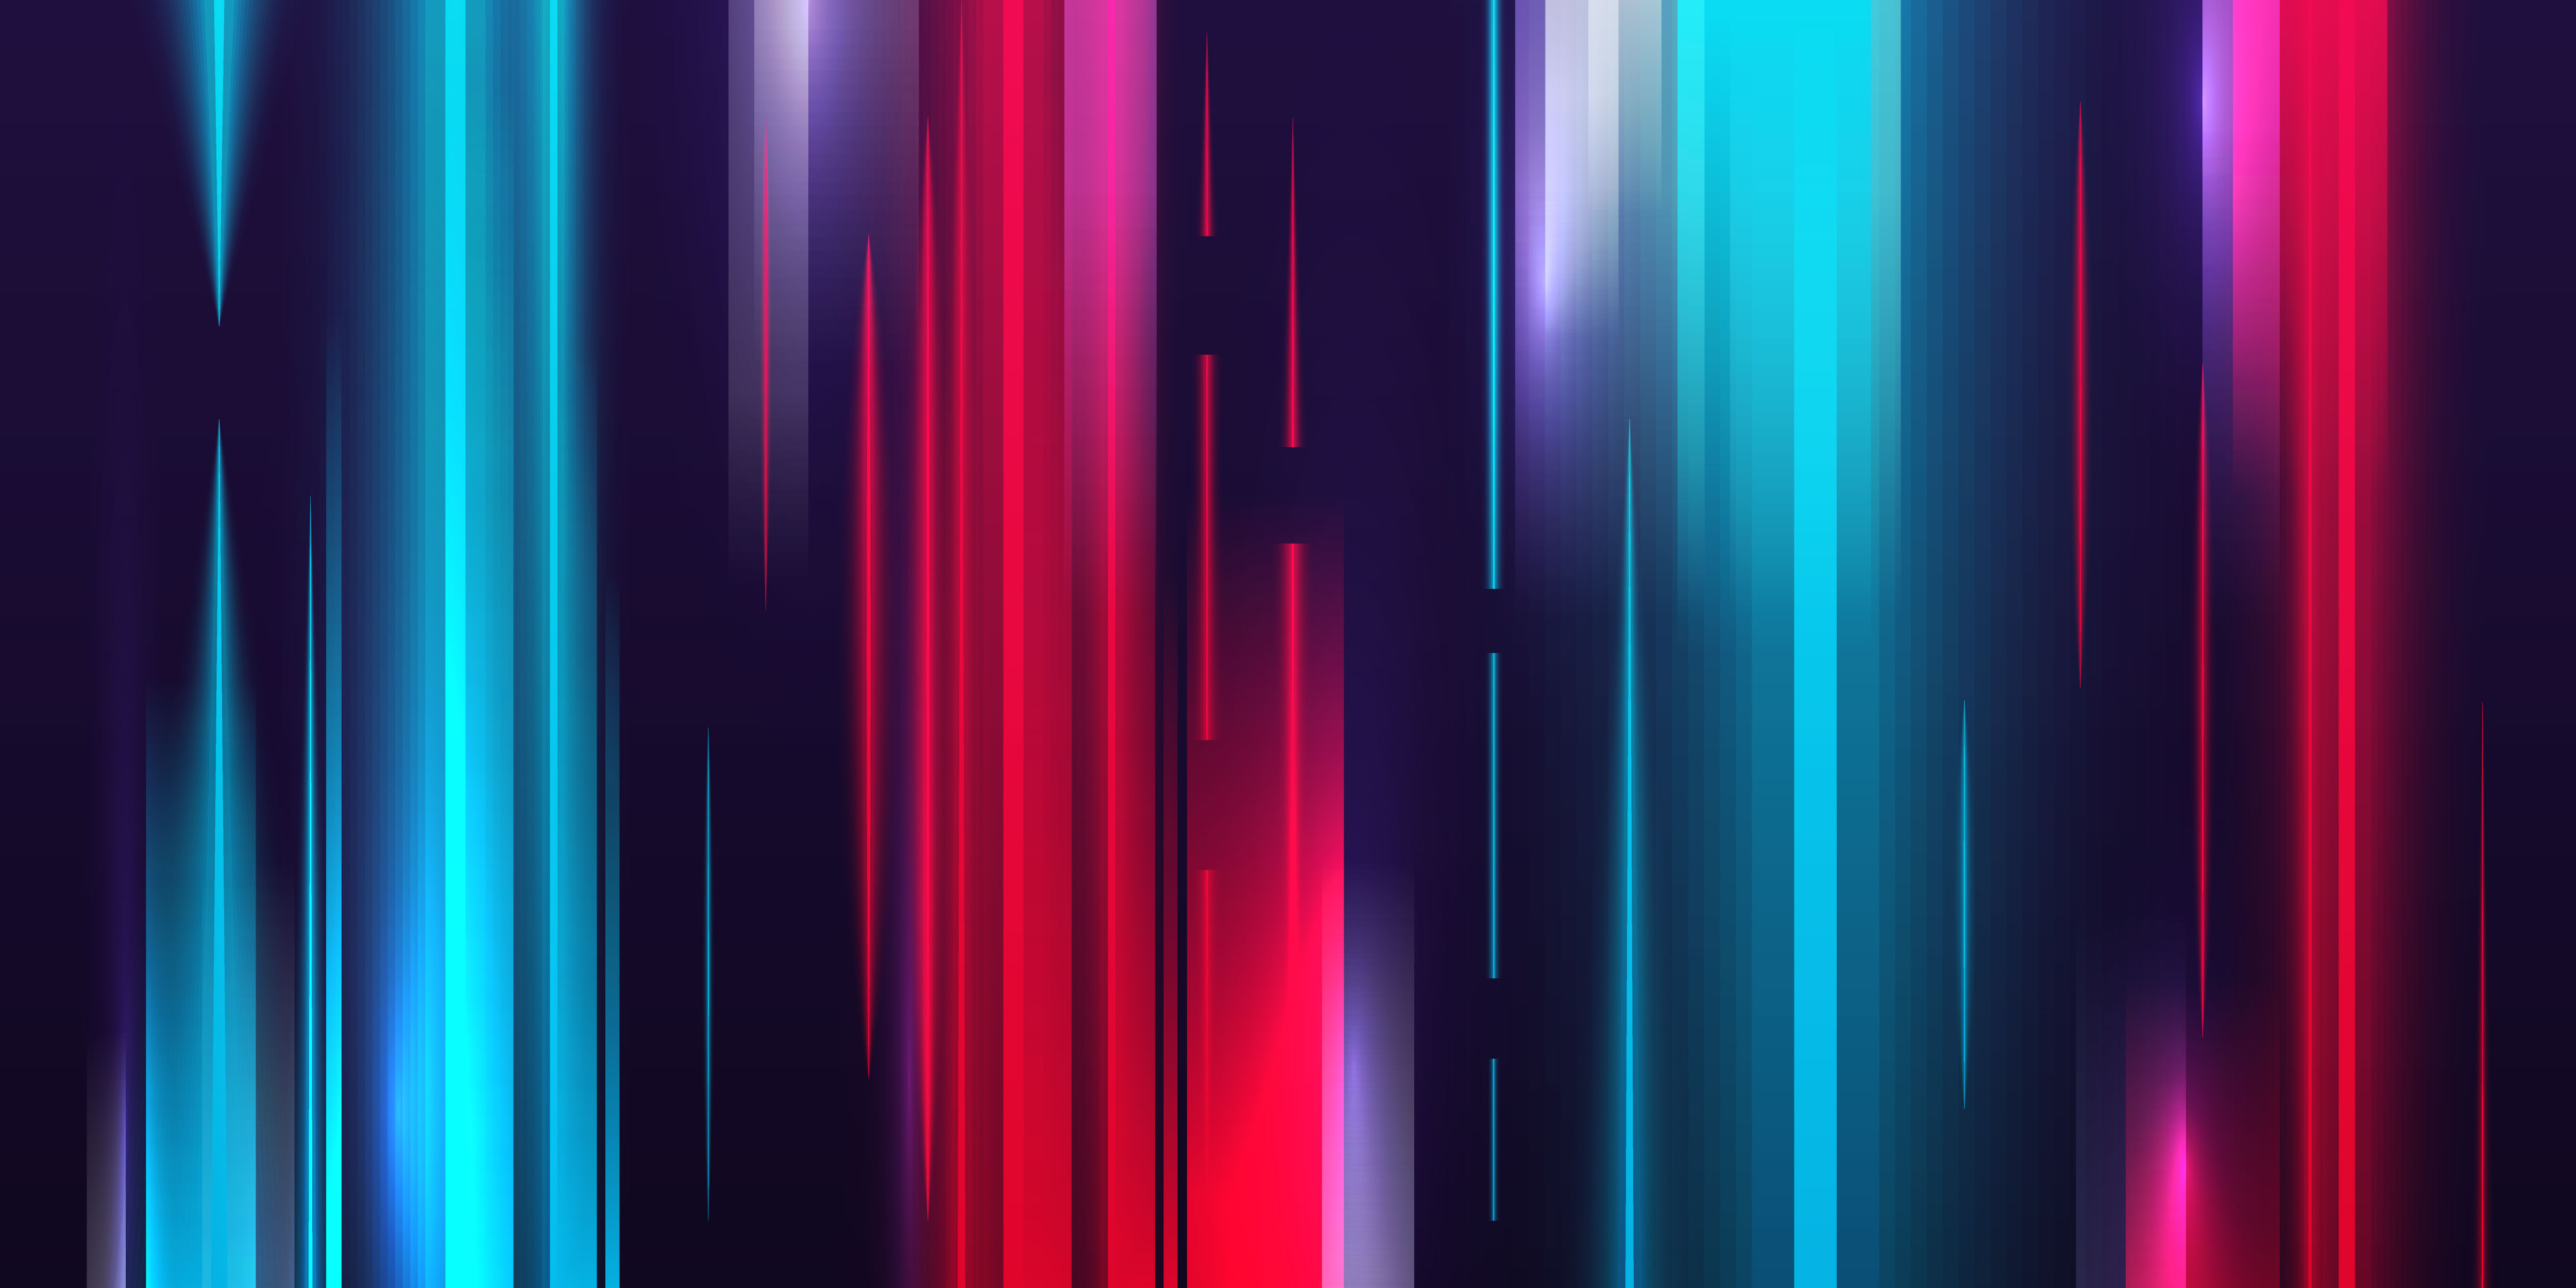 Wallpaper 4k Vertical Lines Colorful Abstract